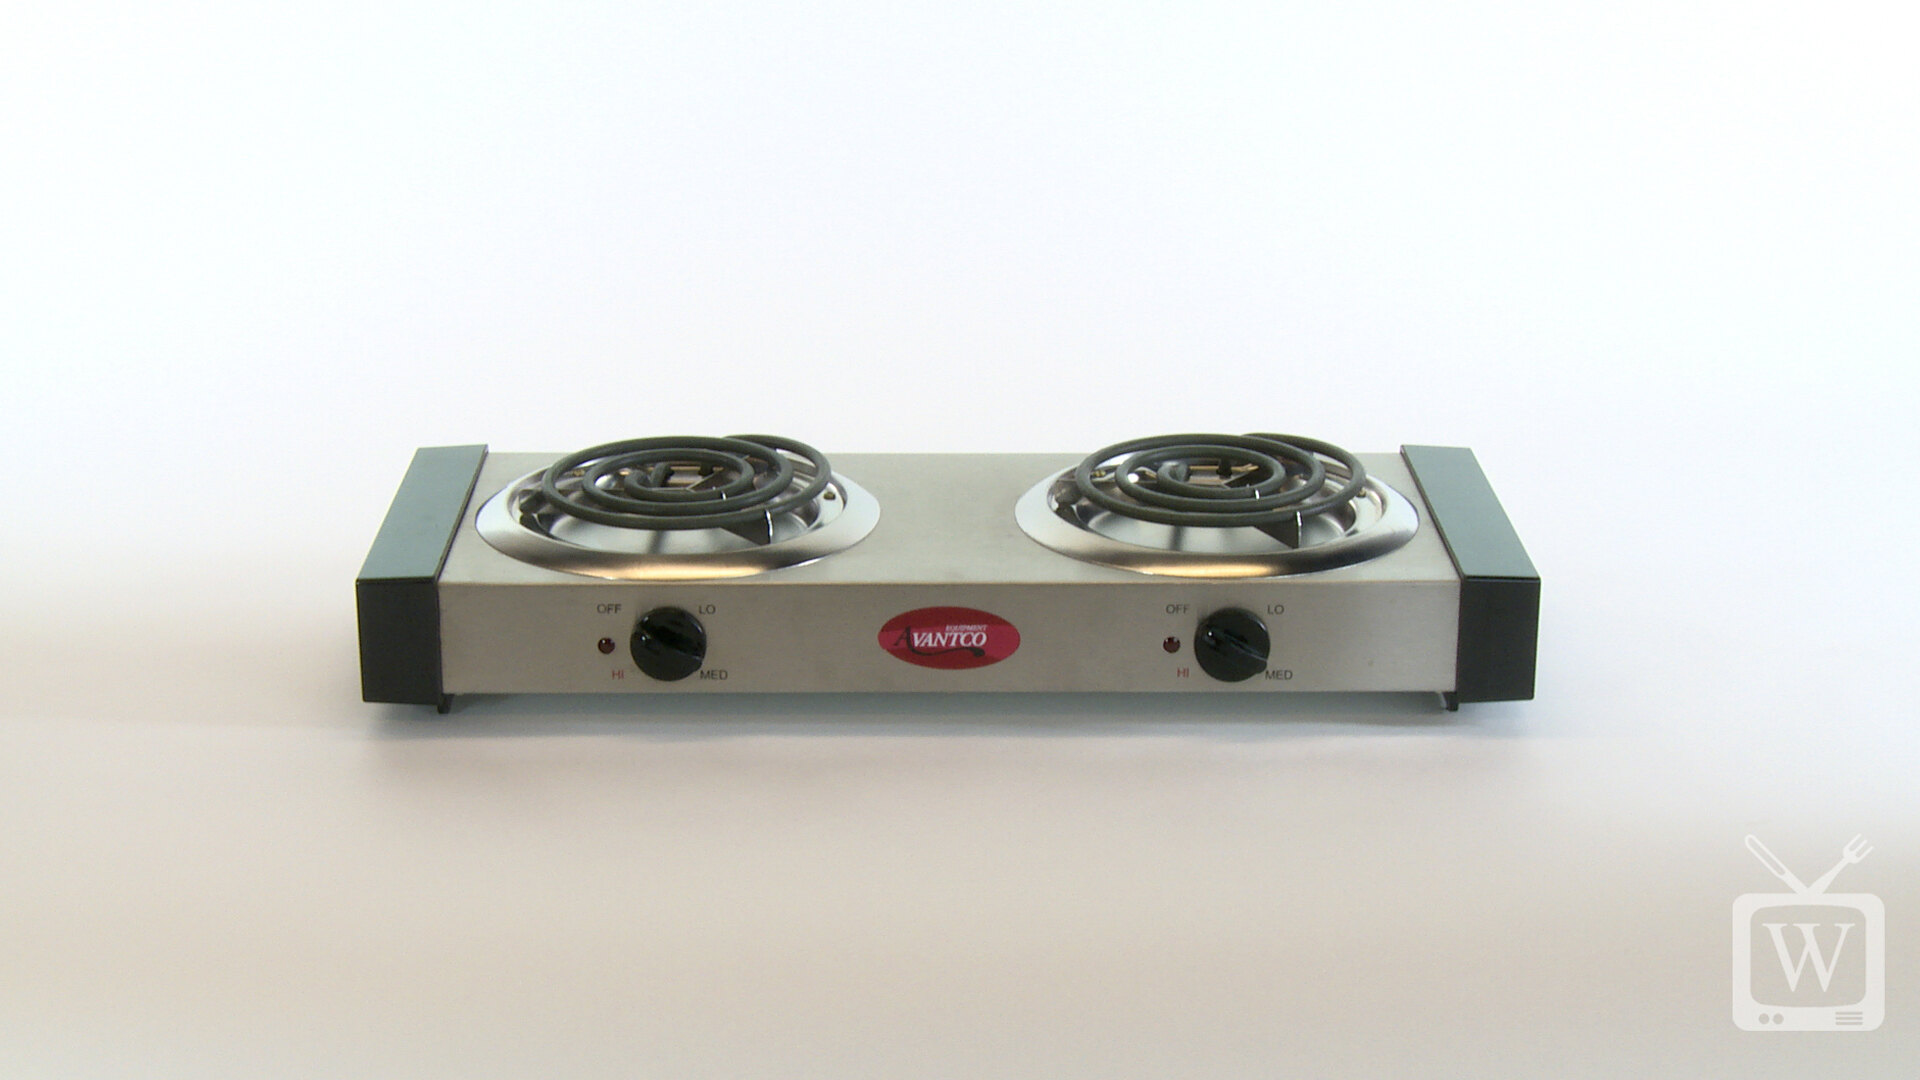 Avantco 177EBS102 Double Burner Solid Top Portable Electric Hot Plate -  1,800W, 120V